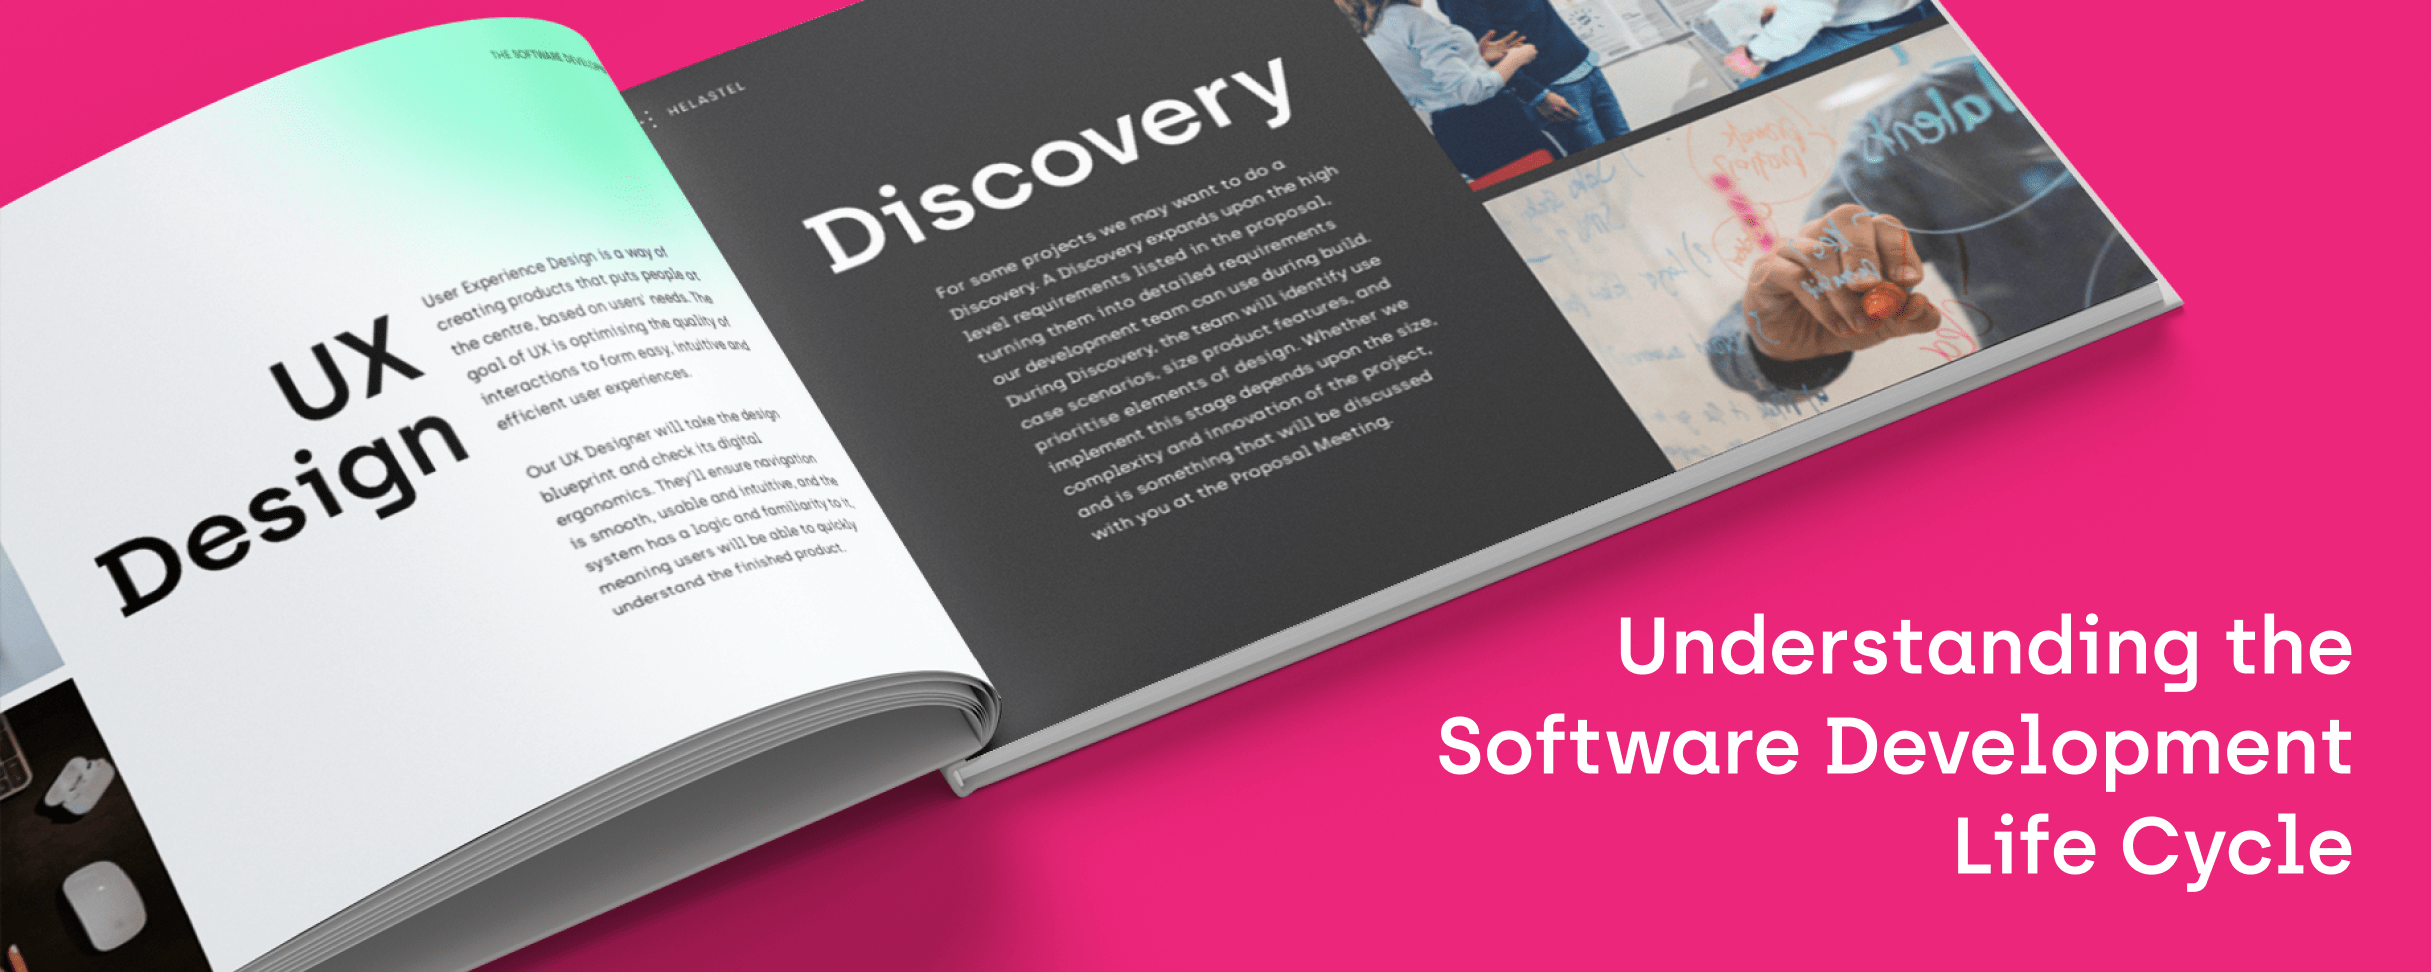 Software Development Life Cycle ebook